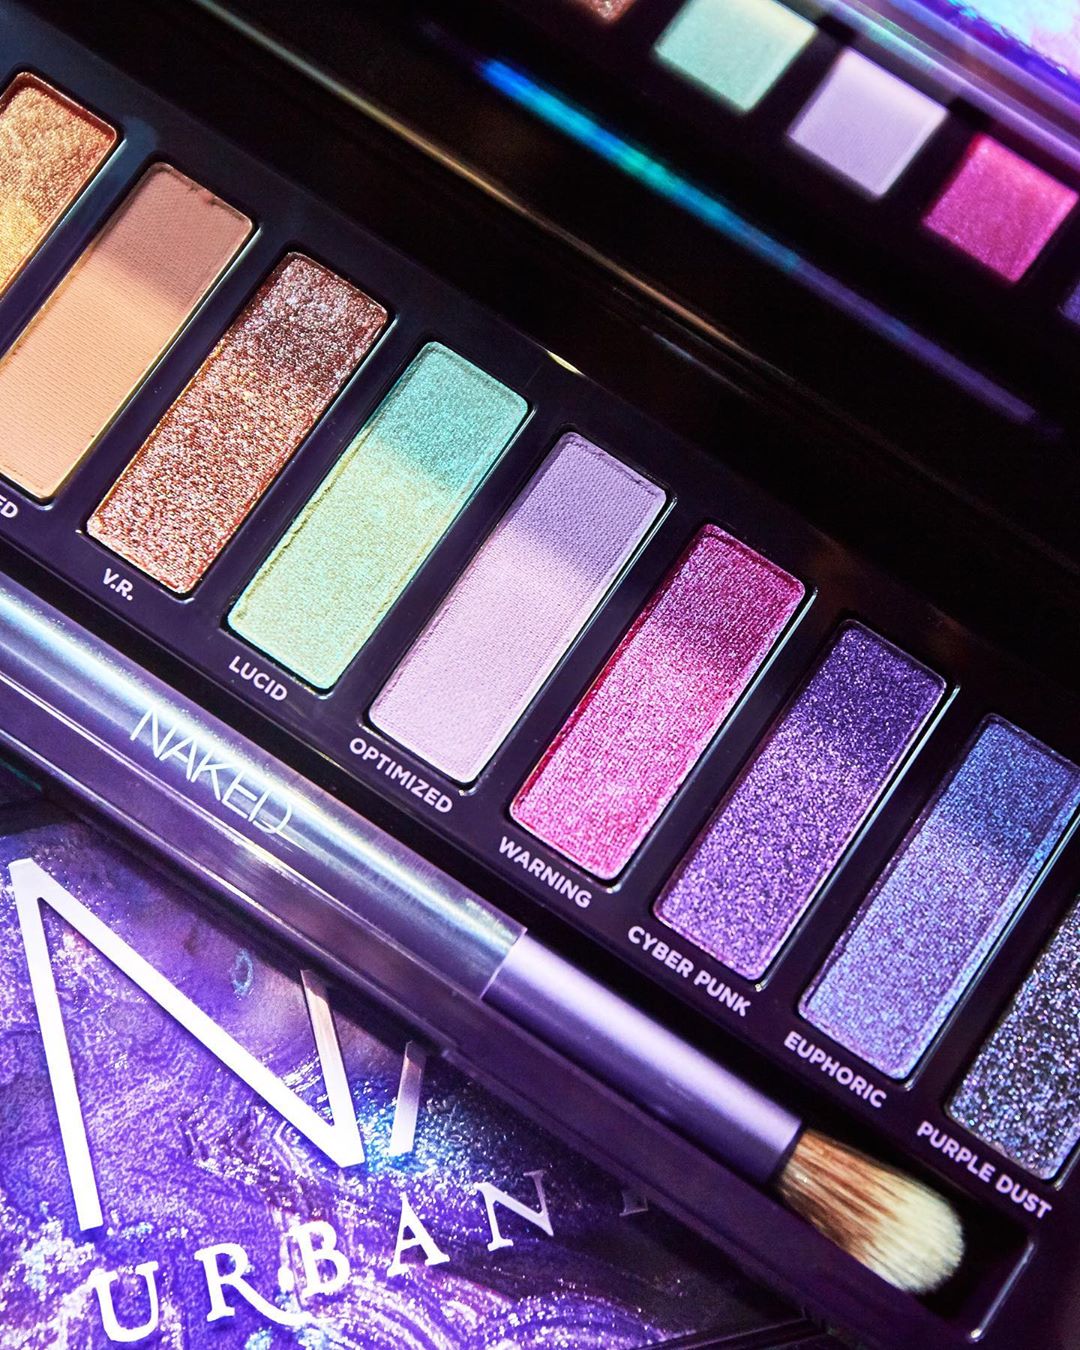 Urban Decay Cosmetics - Once you PURPLE POP, you just CAN’T STOP! 💜 Get the all-new NAKED Ultraviolet Eyeshadow Palette and take your look to the next-level. @Sephora is making is making it easier to...